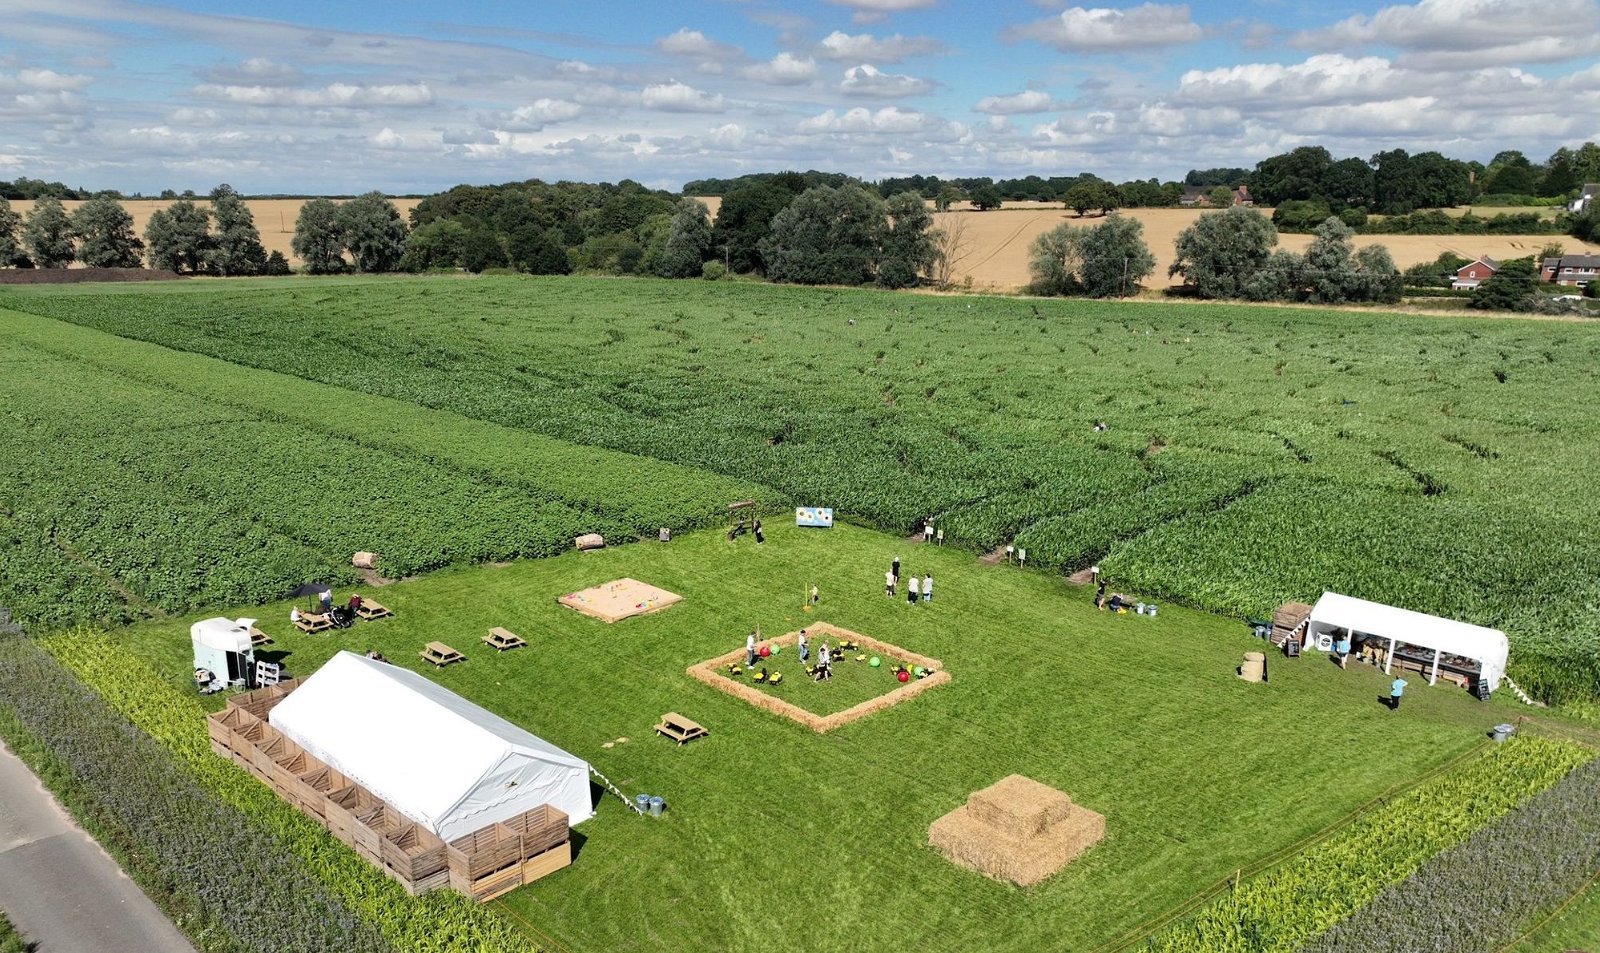 A Very Successful First Year for Lichfield Maize Maze With the Help of Beyonk